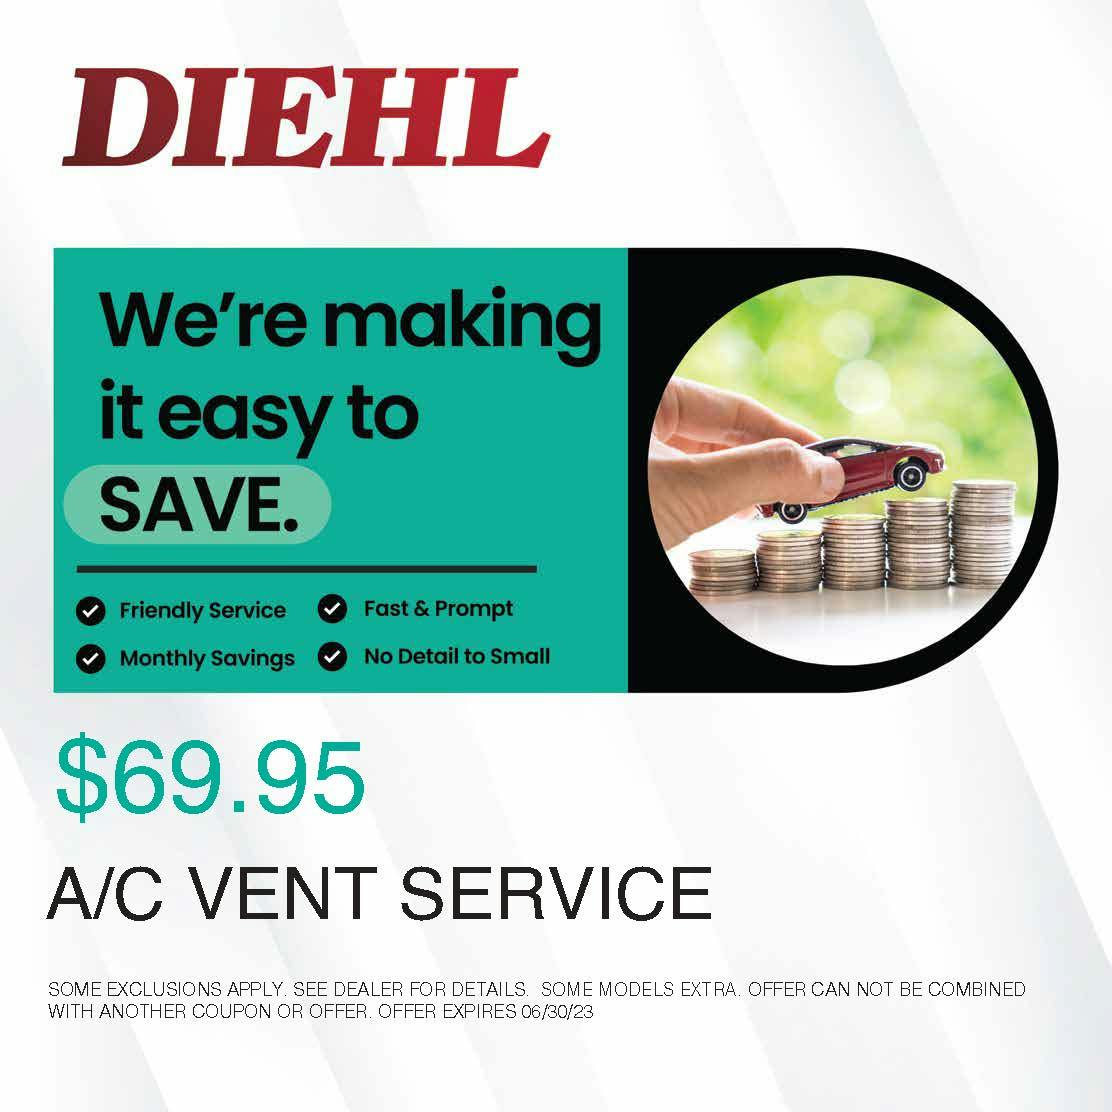 A/C VENT SERVICE SPECIAL | Diehl Toyota of Hermitage